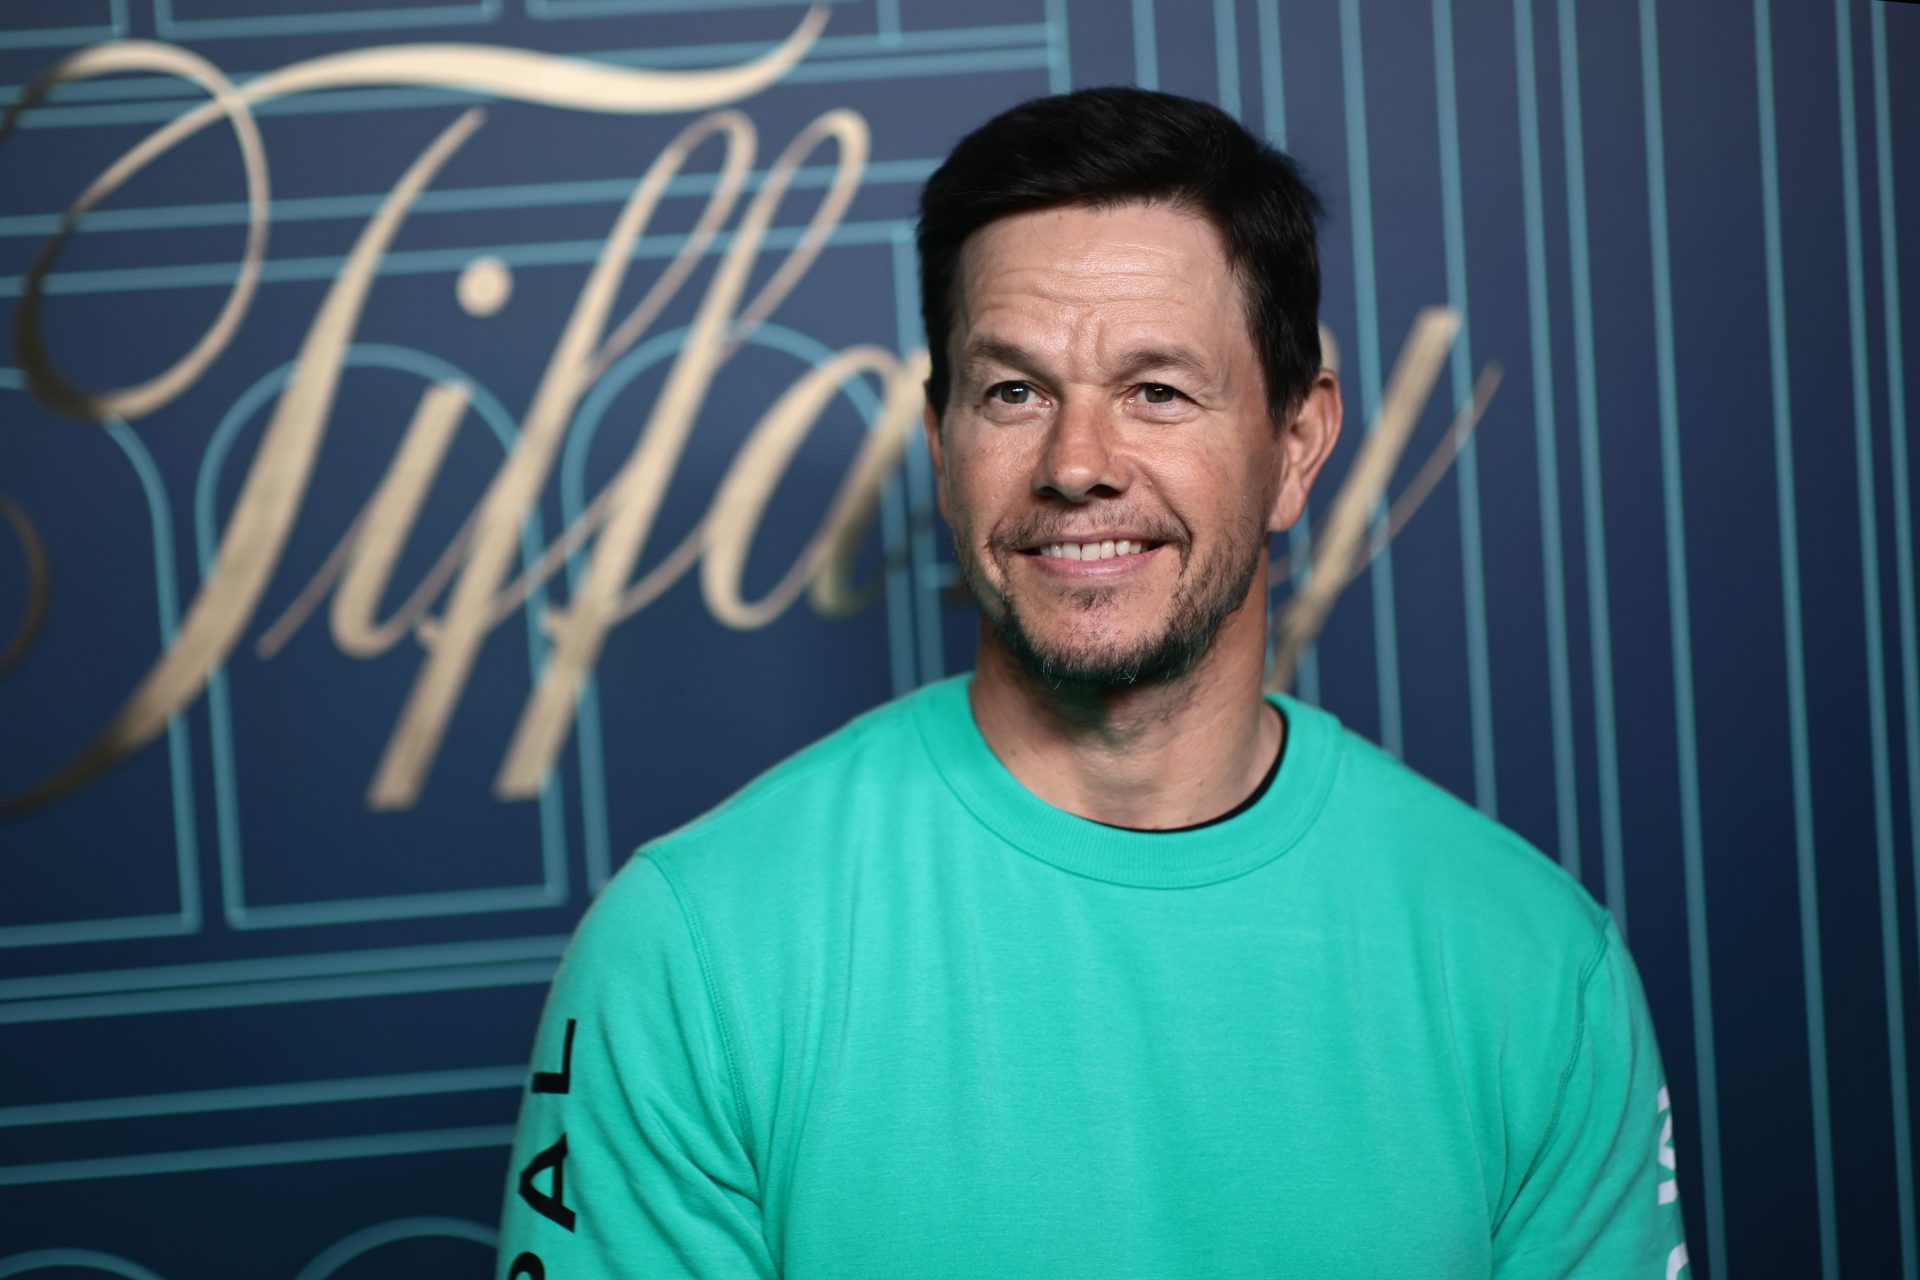 The Mark Wahlberg case